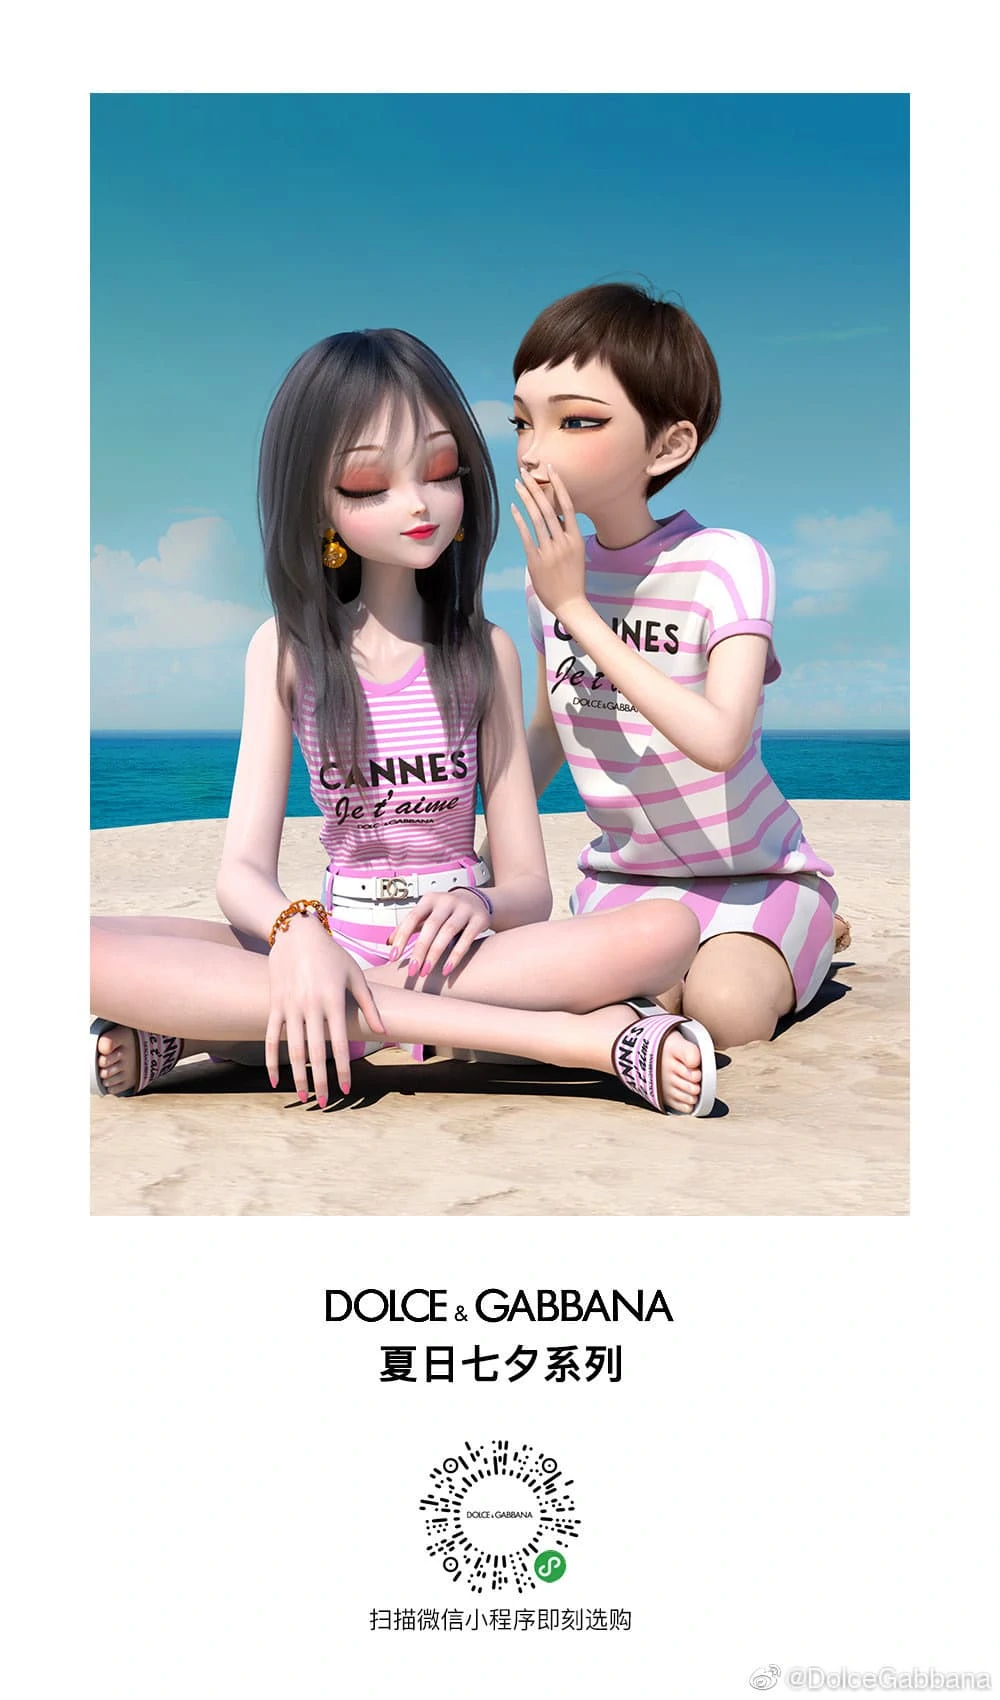 D&G China Valentines Campaign